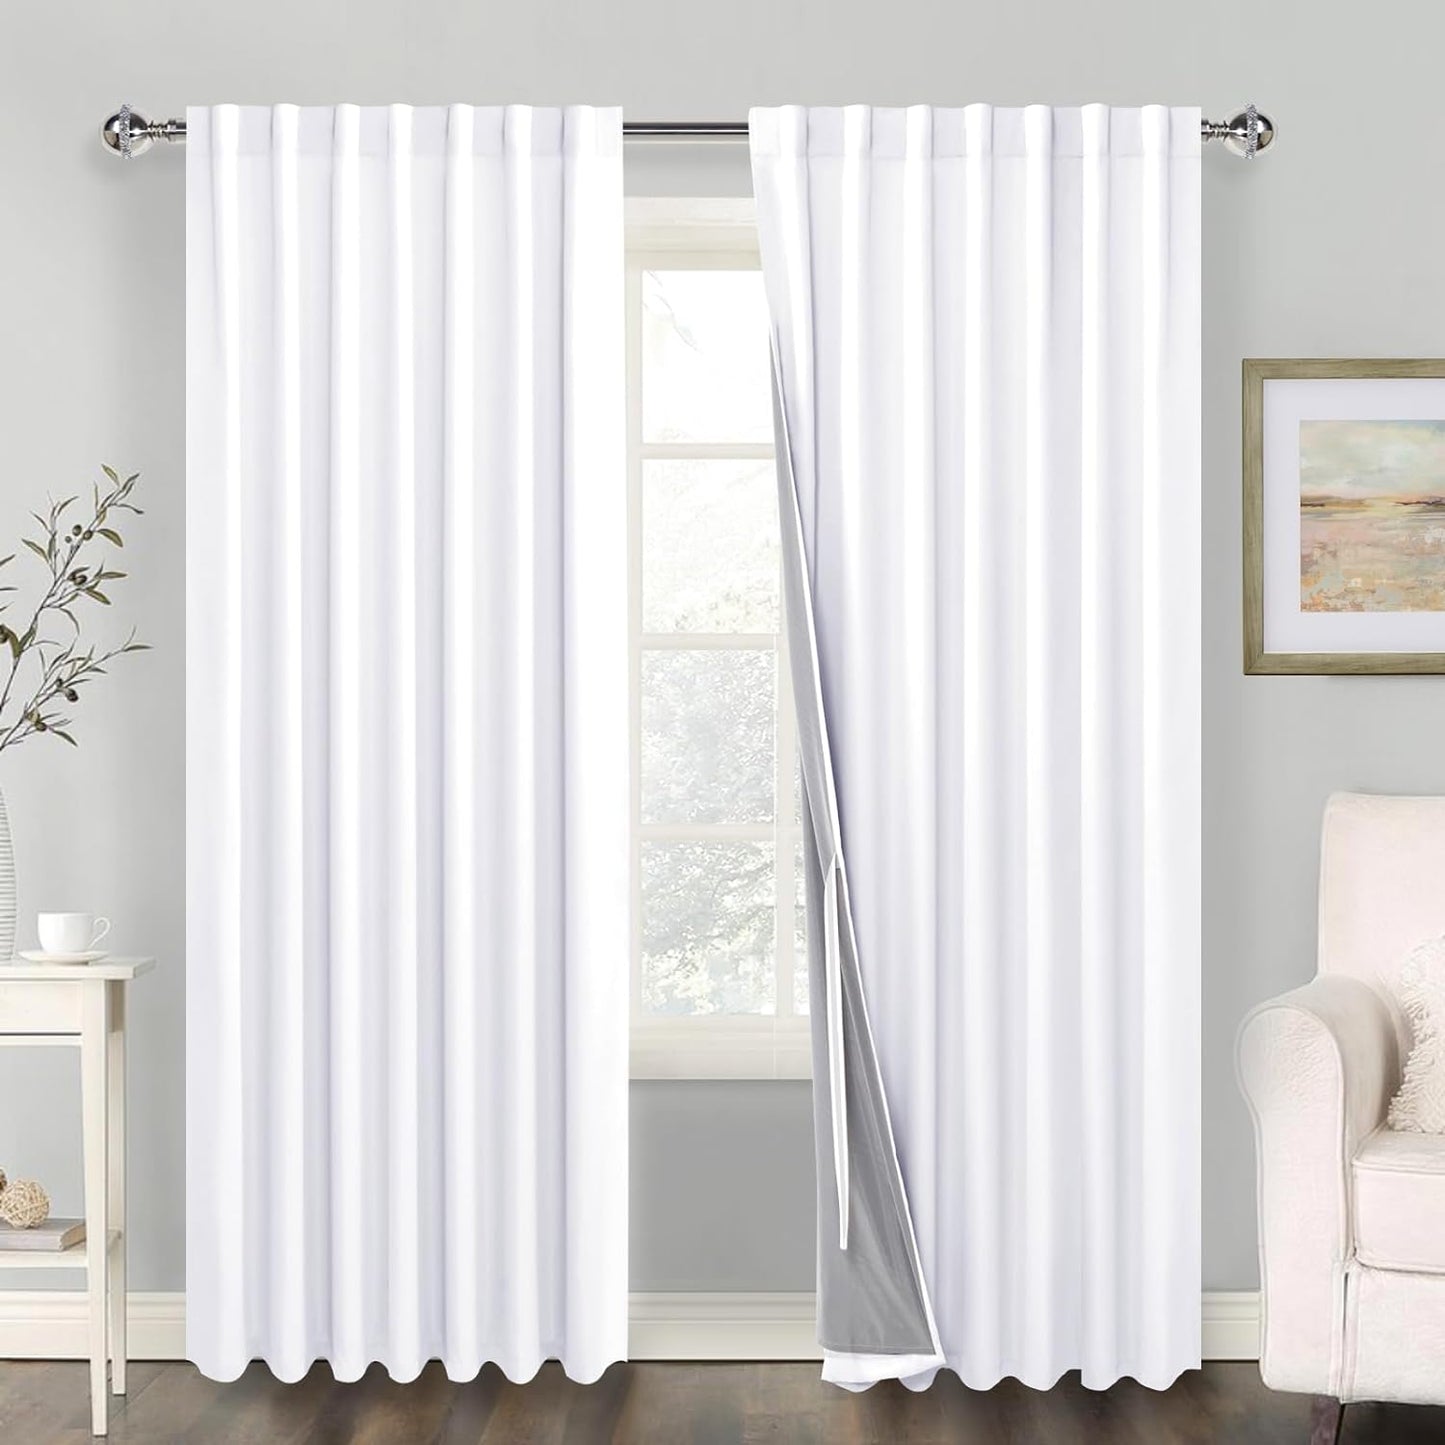 100% Blackout Curtains 2 Panels with Tiebacks- Heat and Full Light Blocking Window Treatment with Black Liner for Bedroom/Nursery, Rod Pocket & Back Tab，White, W52 X L84 Inches Long, Set of 2  XWZO White W60" X L84"|2 Panels 